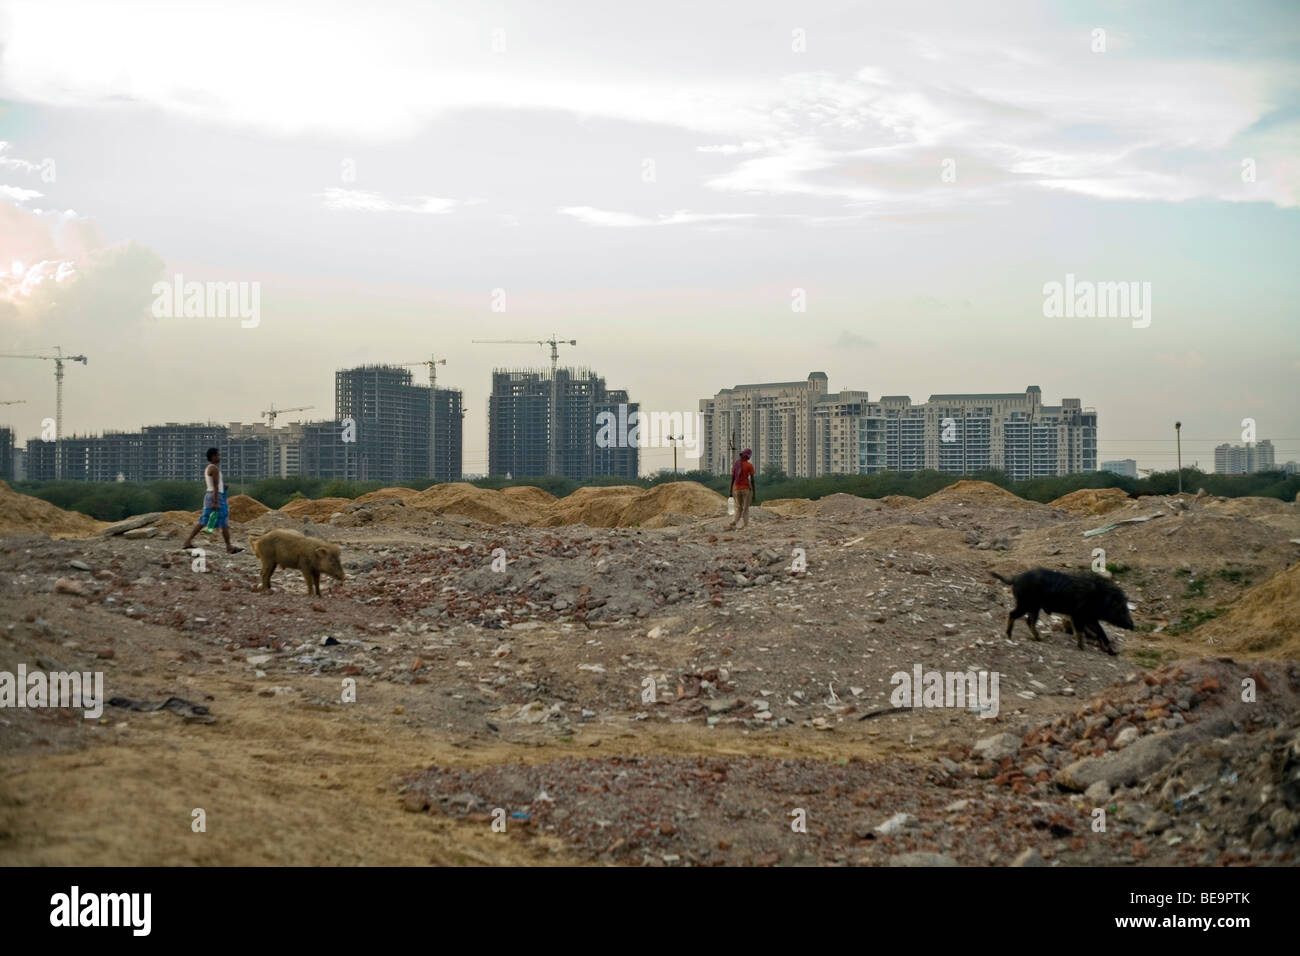 Men and wild pigs walking through a labour camp in the shadow of a new development in Gurgaon, India Stock Photo